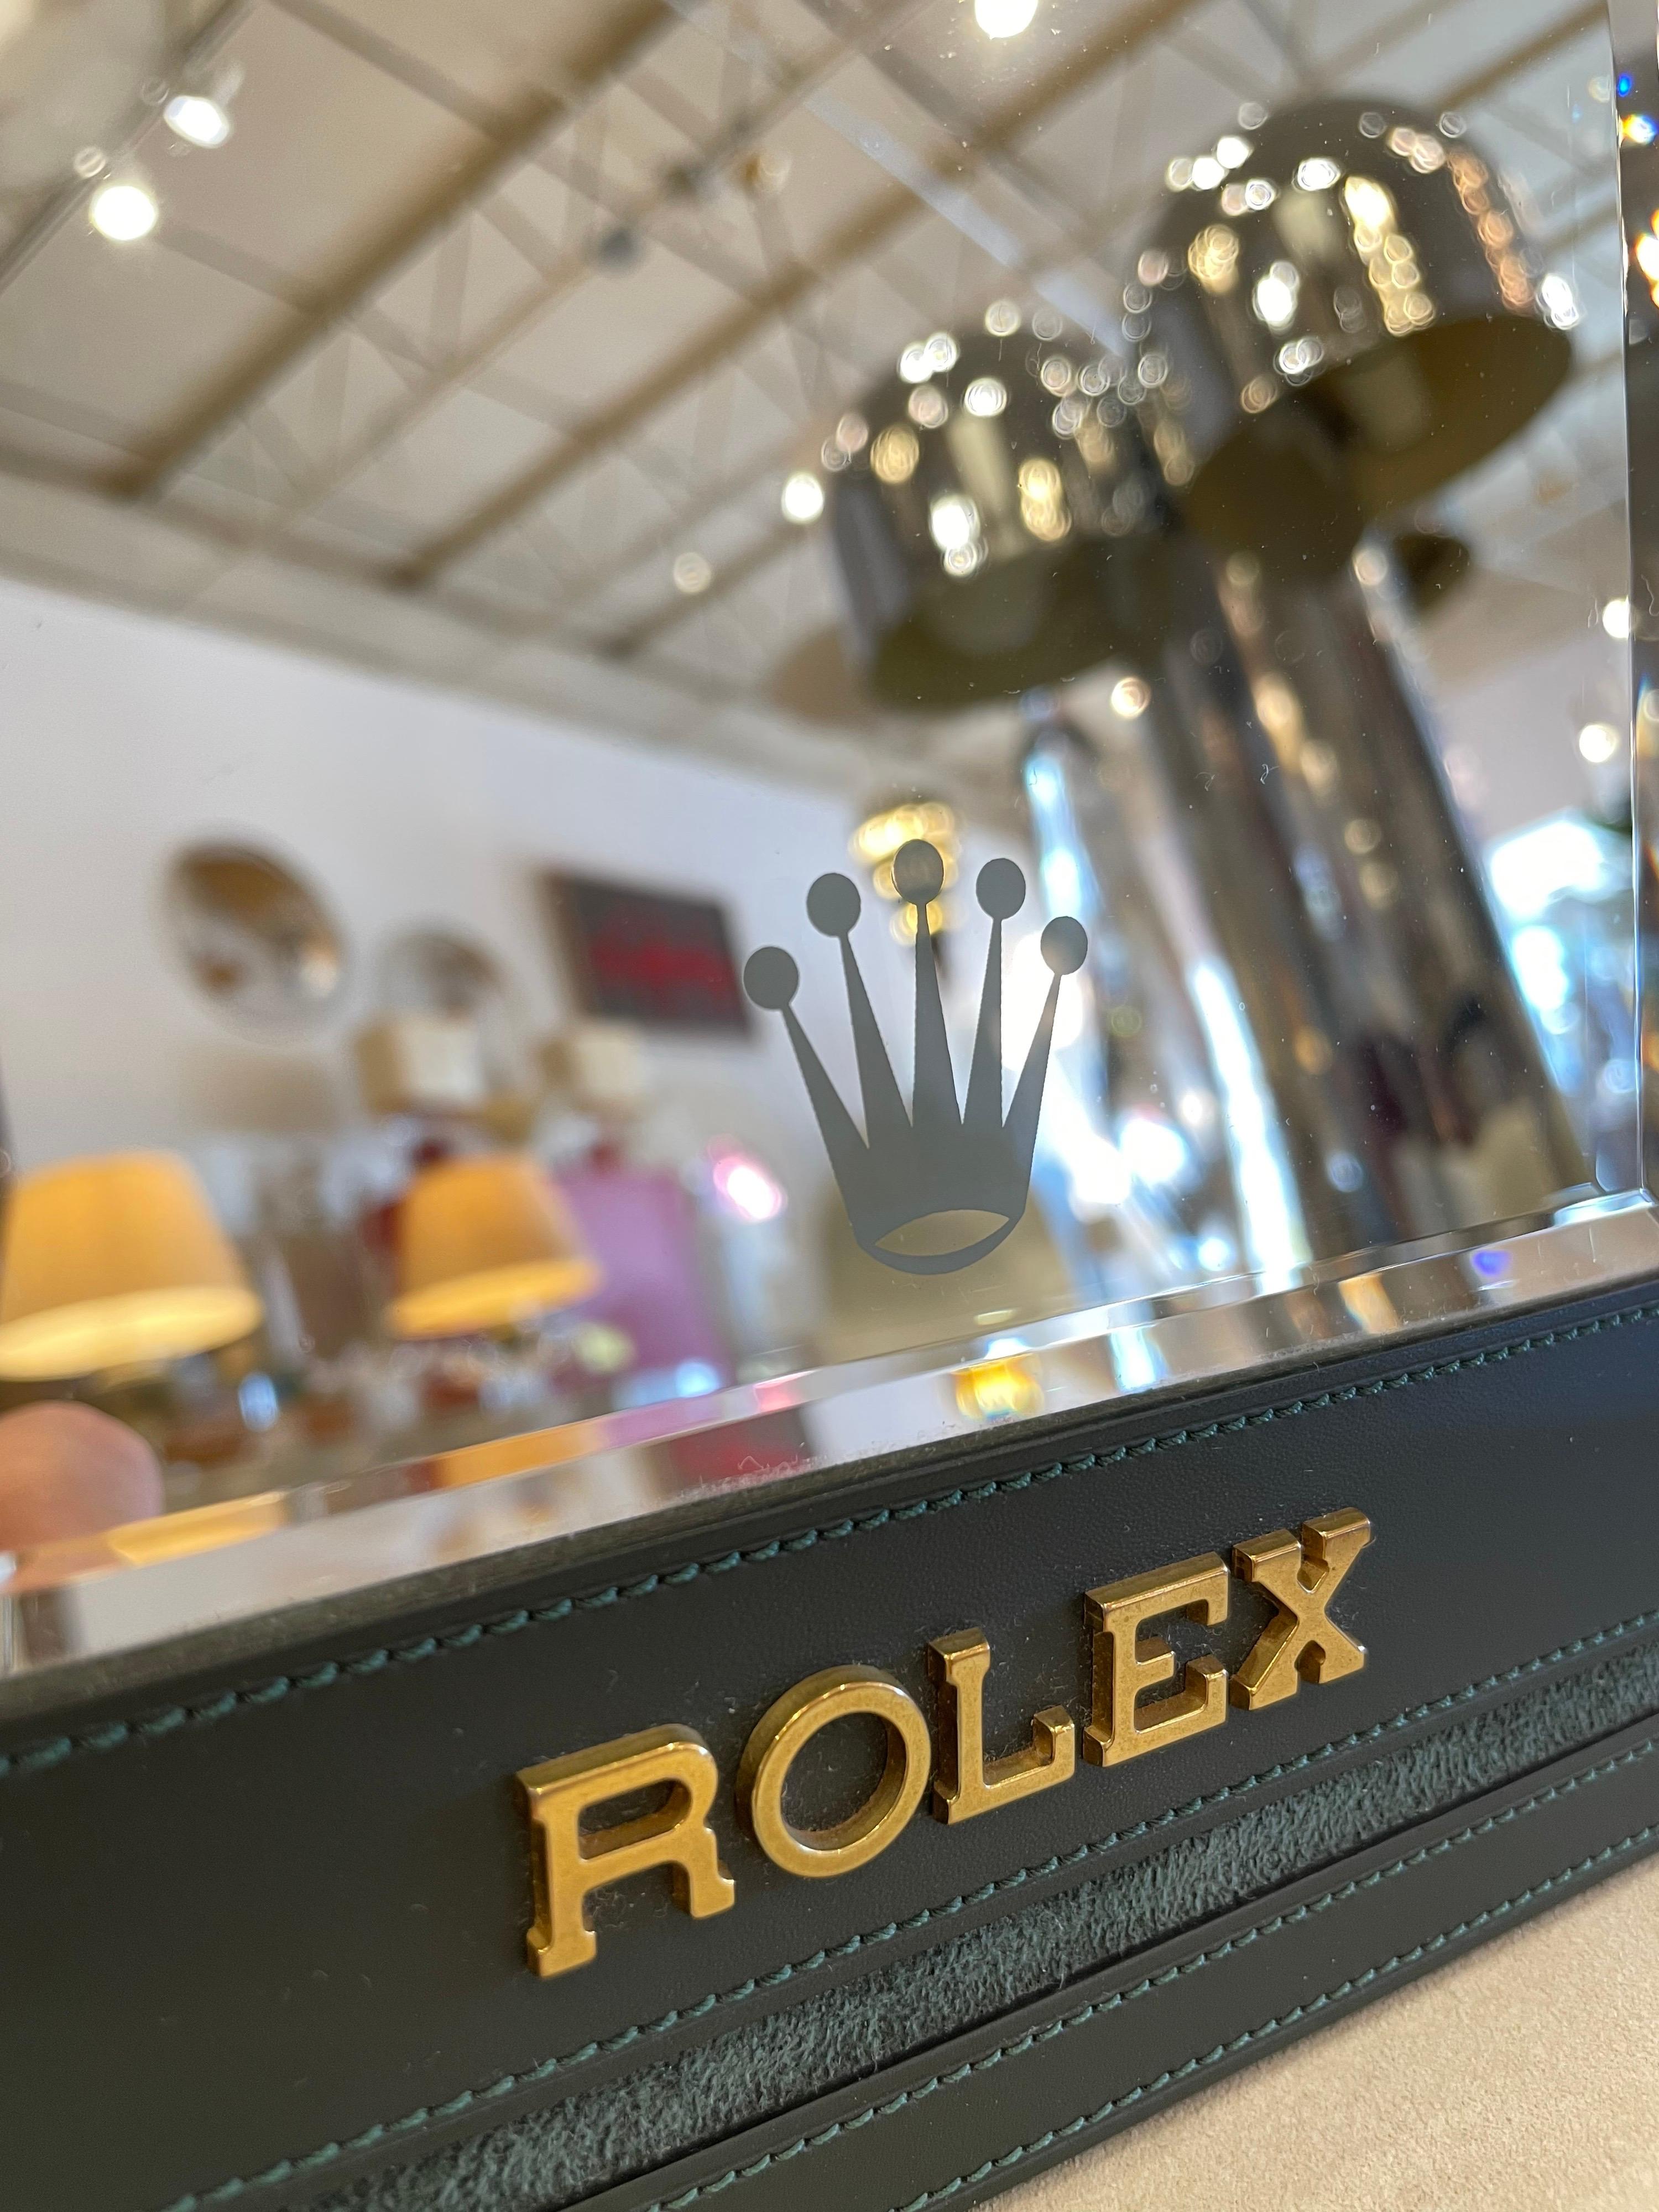 This amazing green stitched leather and suede bound Rolex display mirror features raised brass/gold iconic Rolex Logo on the leather as well as a frosted Rolex crown logo to mirror. Mounted with a beveled edge mirror and on an easel support.